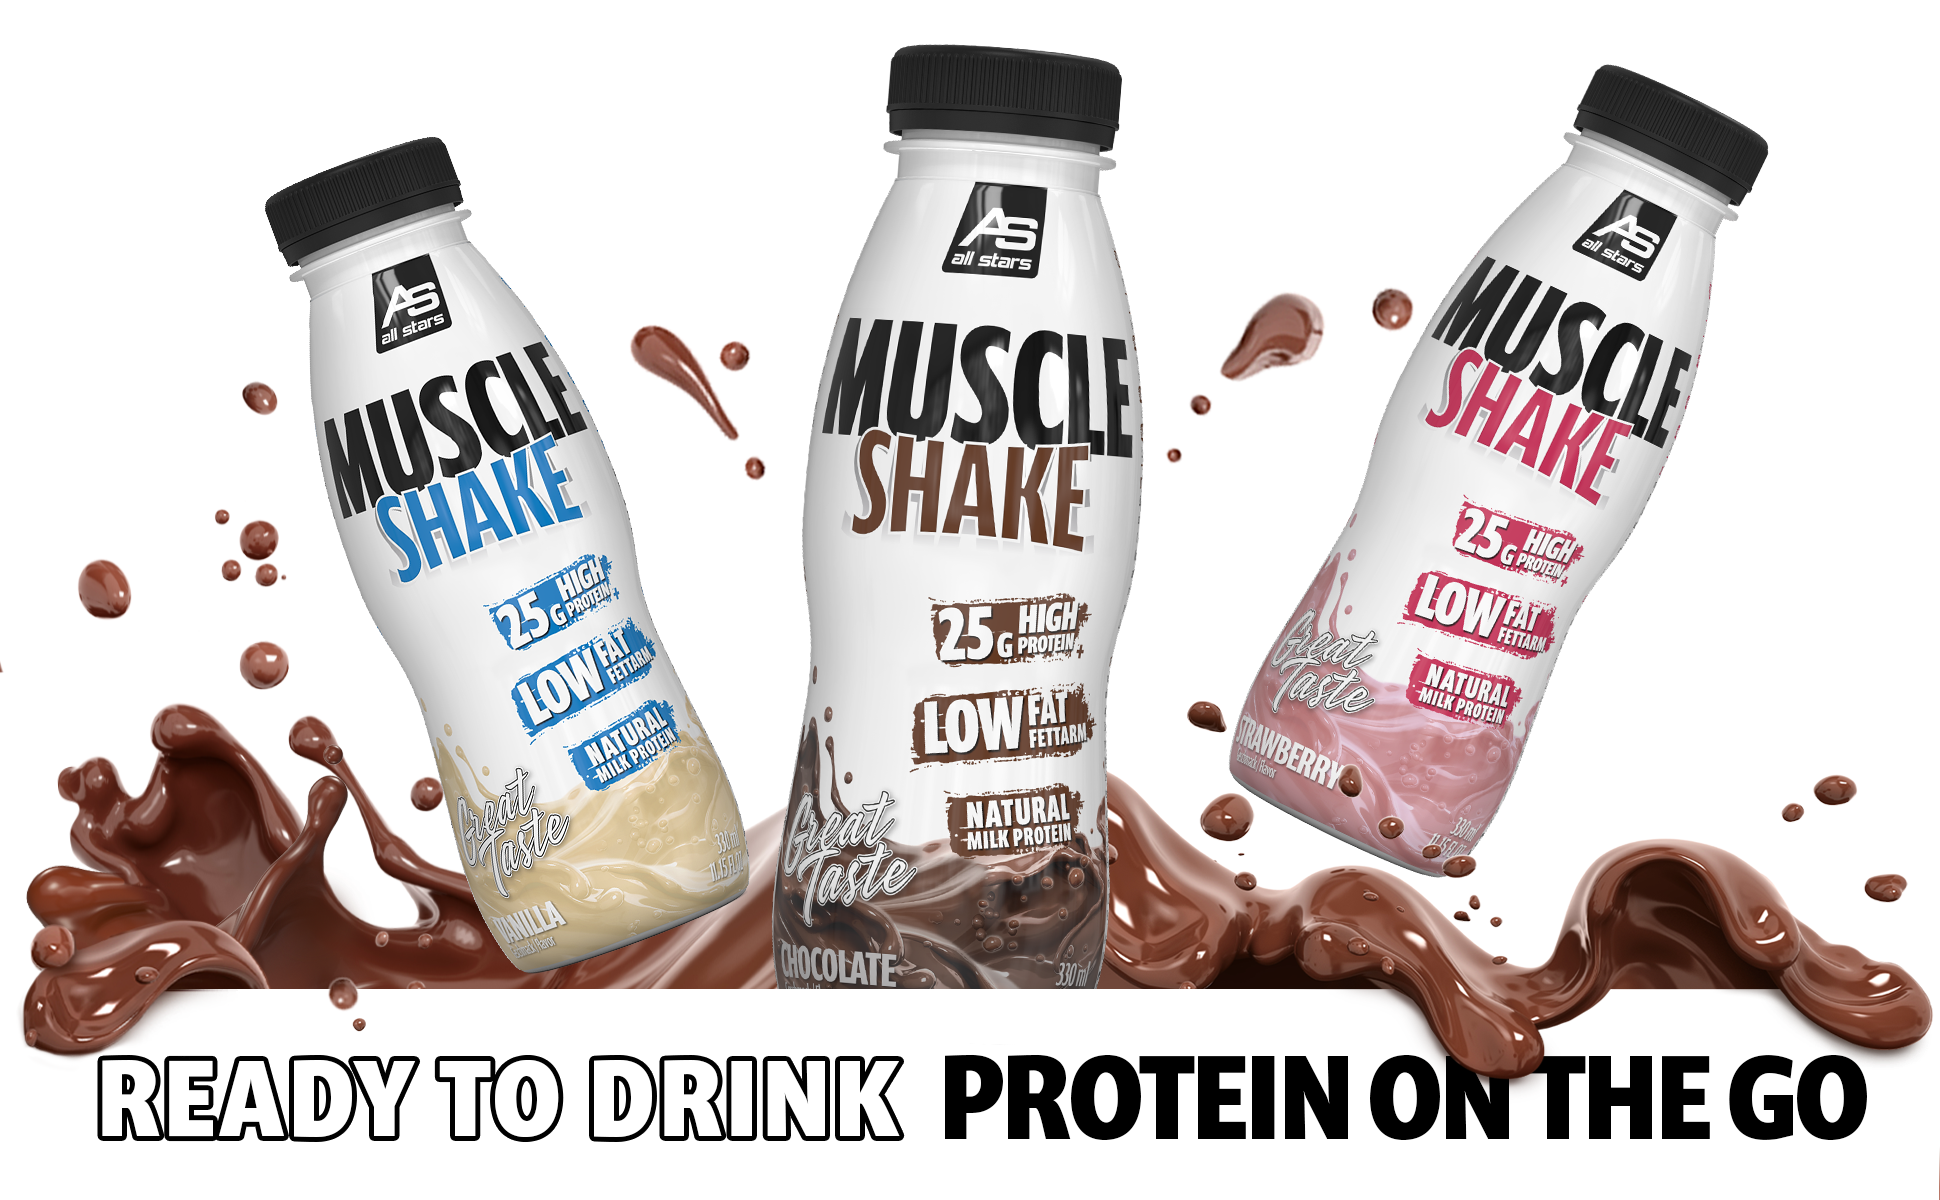 All Stars Muscle shake Protein